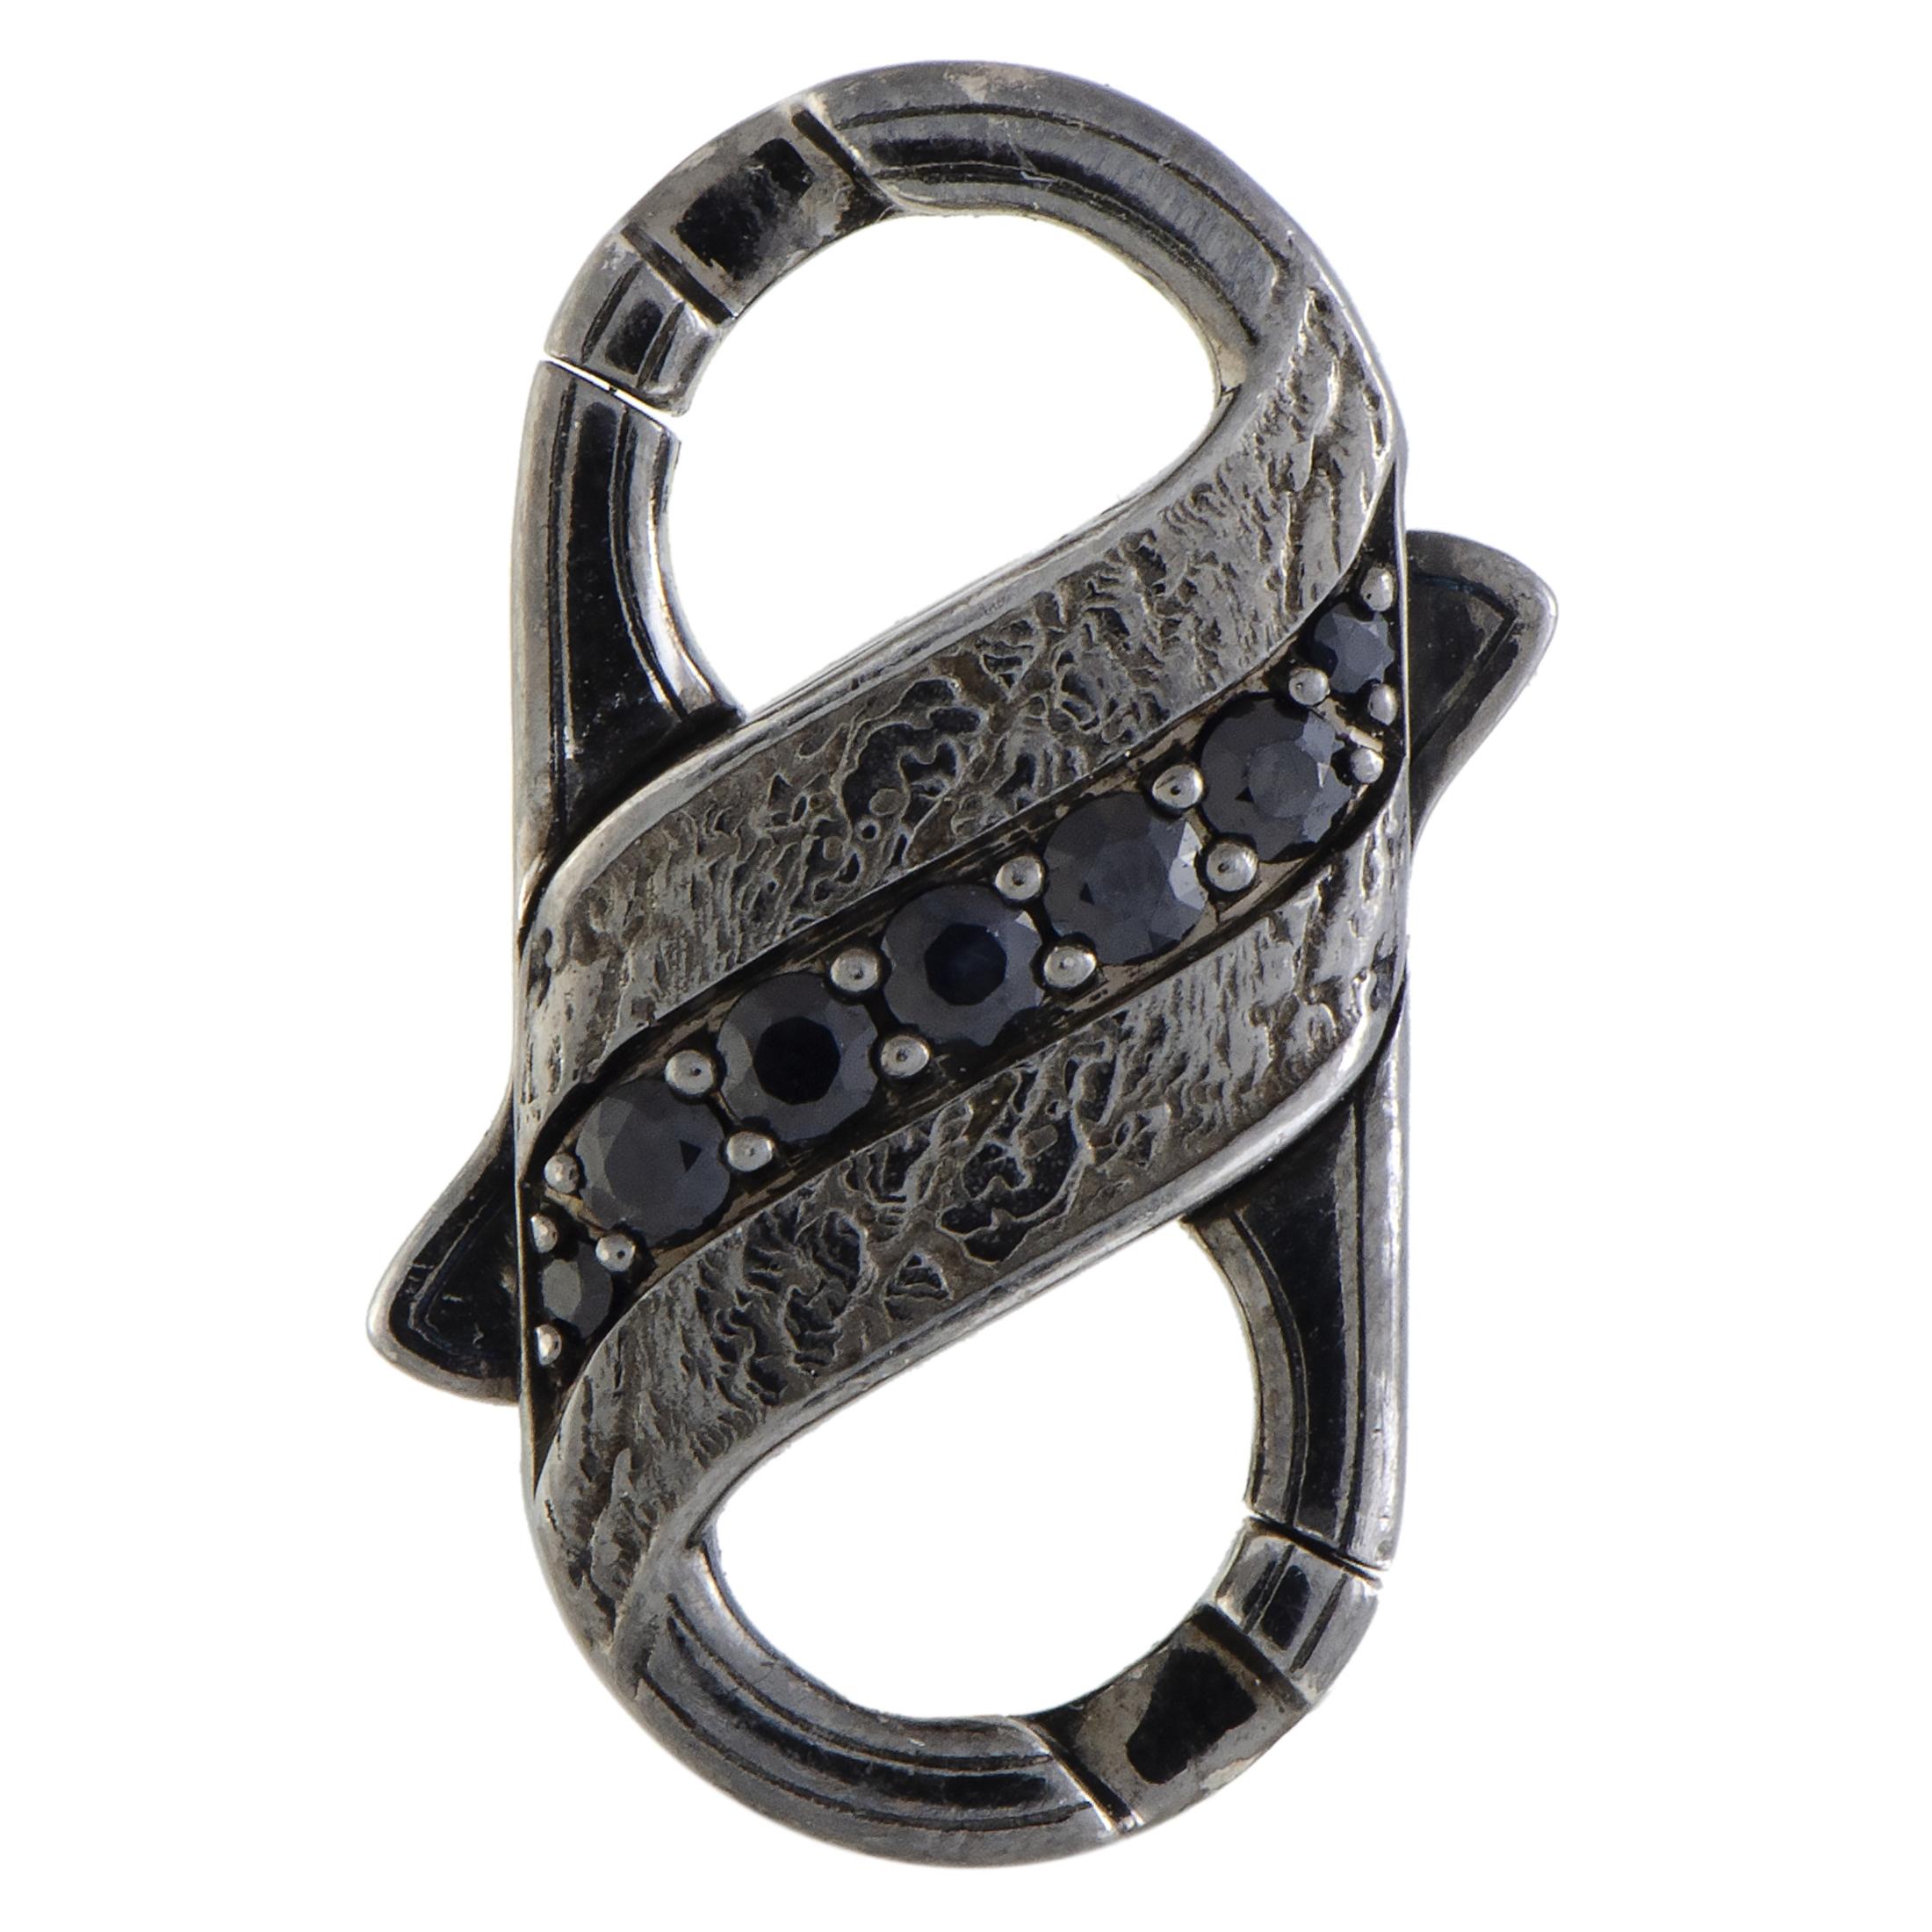 This extraordinary gentlemen’s clasp is characterized by incredibly rugged design that gives a stunningly masculine appeal to the piece, attractively accentuated by eye-catching gems. The clasp is presented by Stephen Webster within the “England